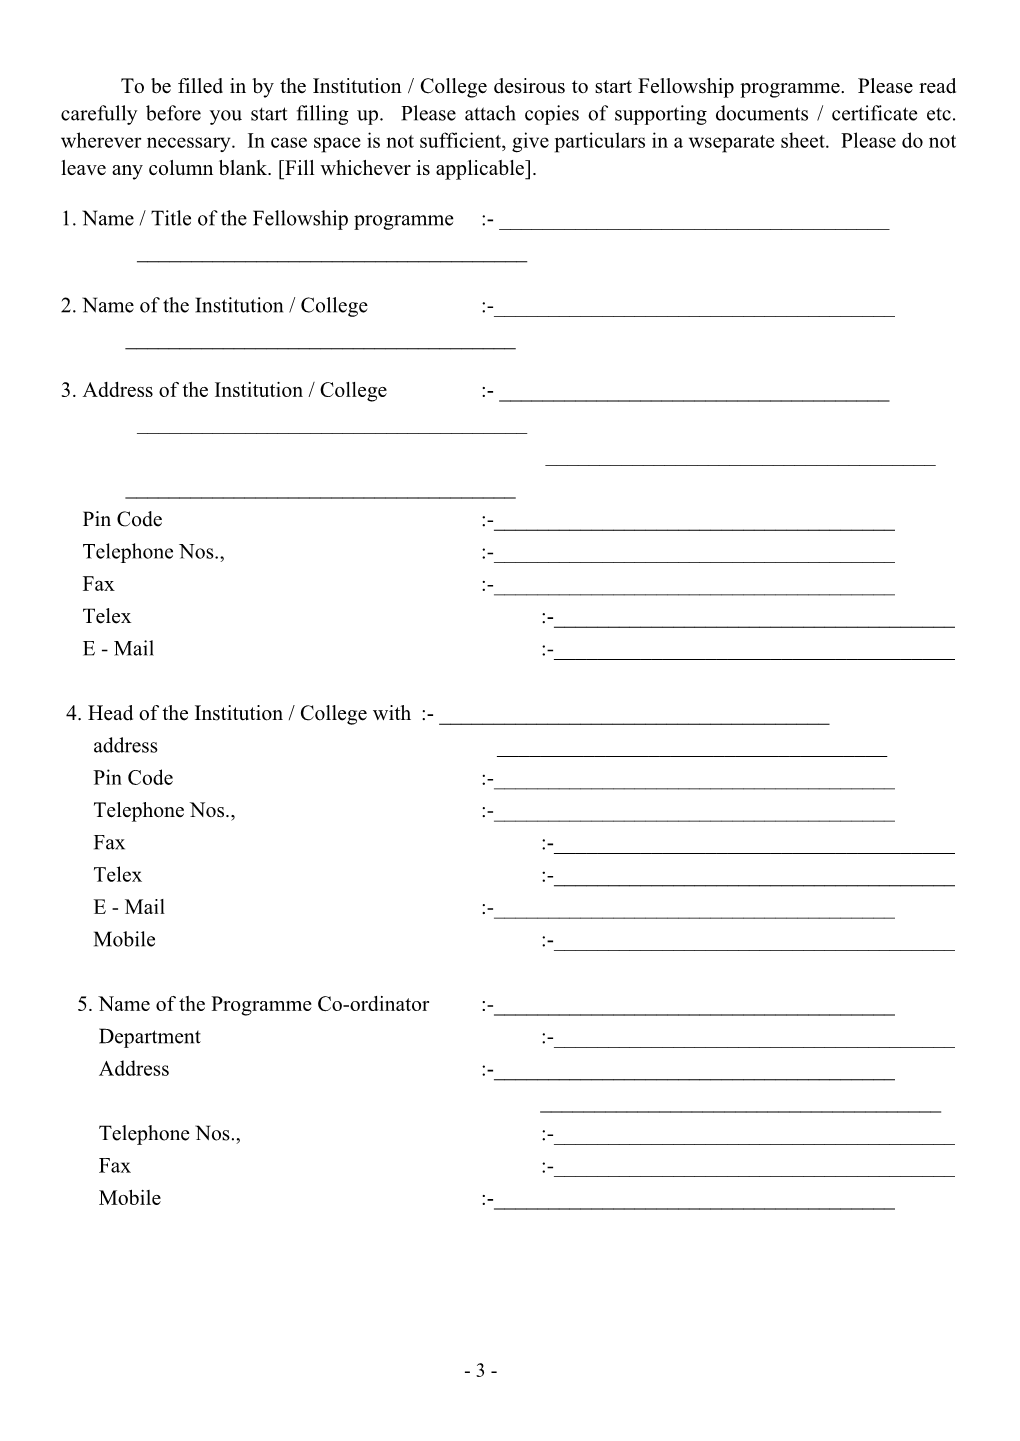 Application for Fresh Fellowship / Certificate Courses Form No. 5